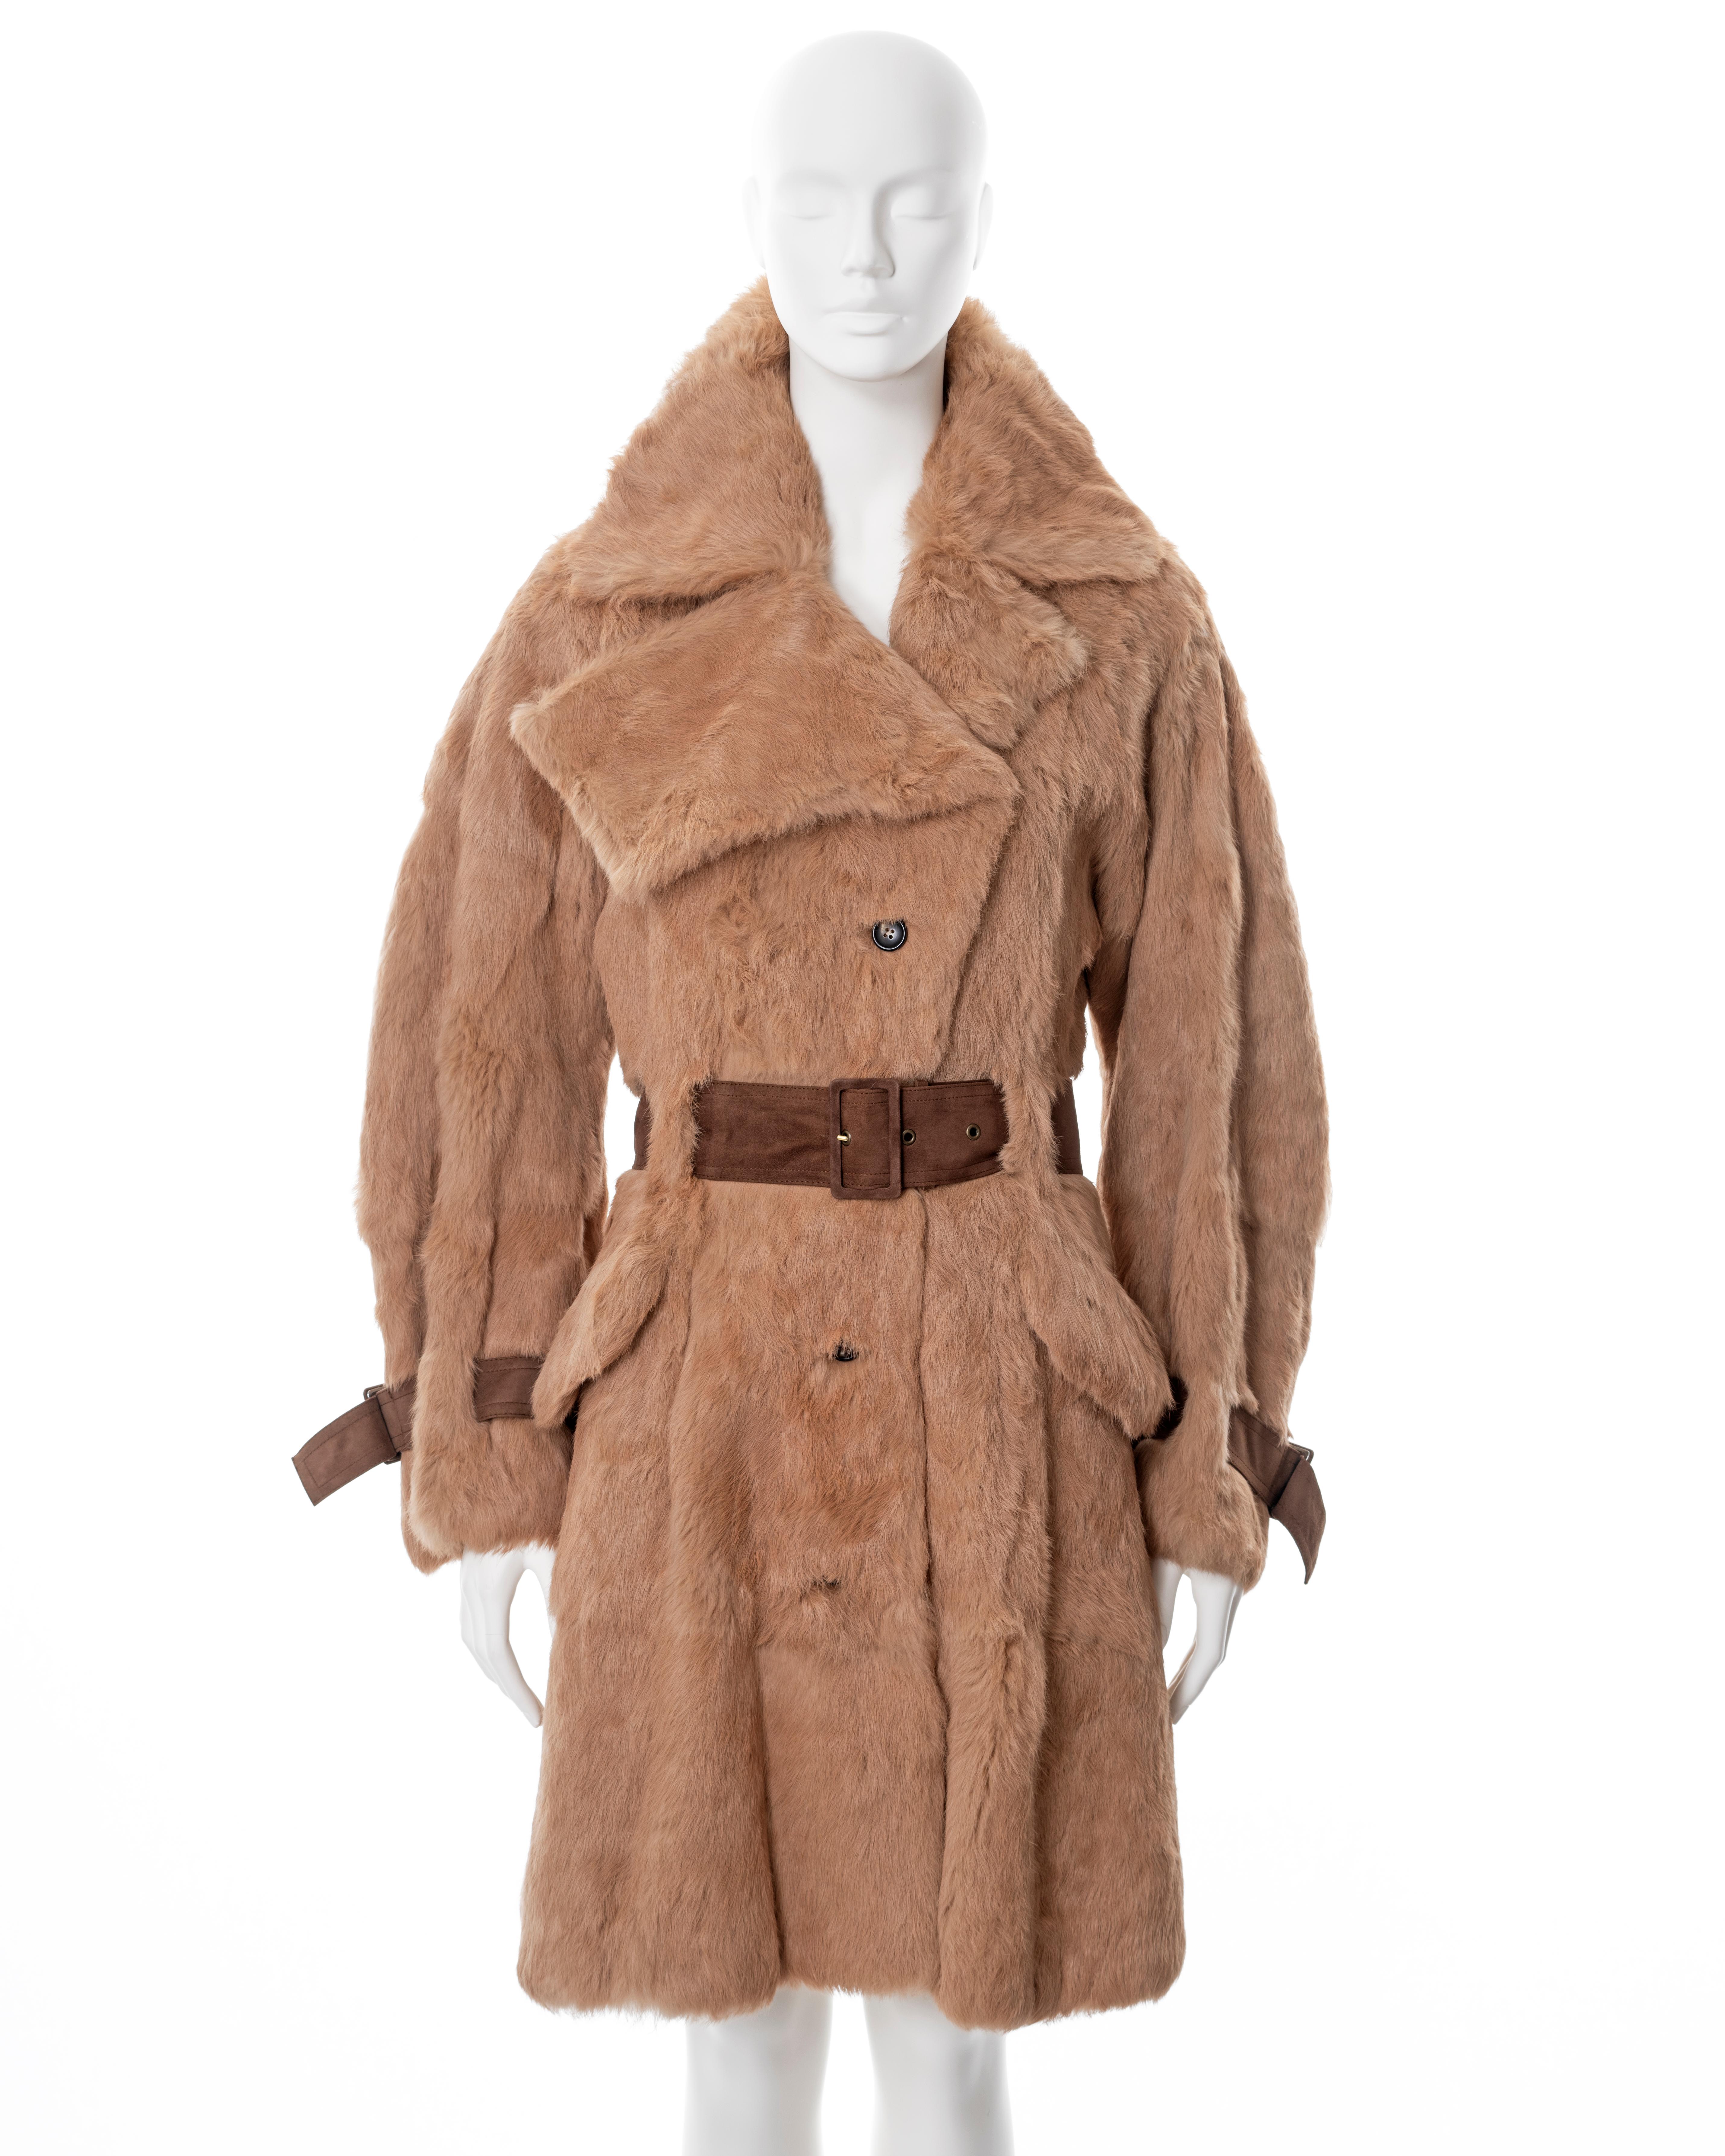 ▪ John Galliano fur trench coat
▪ Sold by One of a Kind Archive
▪ Fall-Winter 2003
▪ Constructed from fawn coloured rabbit fur 
▪ Brown suede belt and buckles 
▪ Front button closure 
▪ Wide curved sleeves 
▪ 2 front flap pocket 
▪ FR 36 - UK 8 - IT